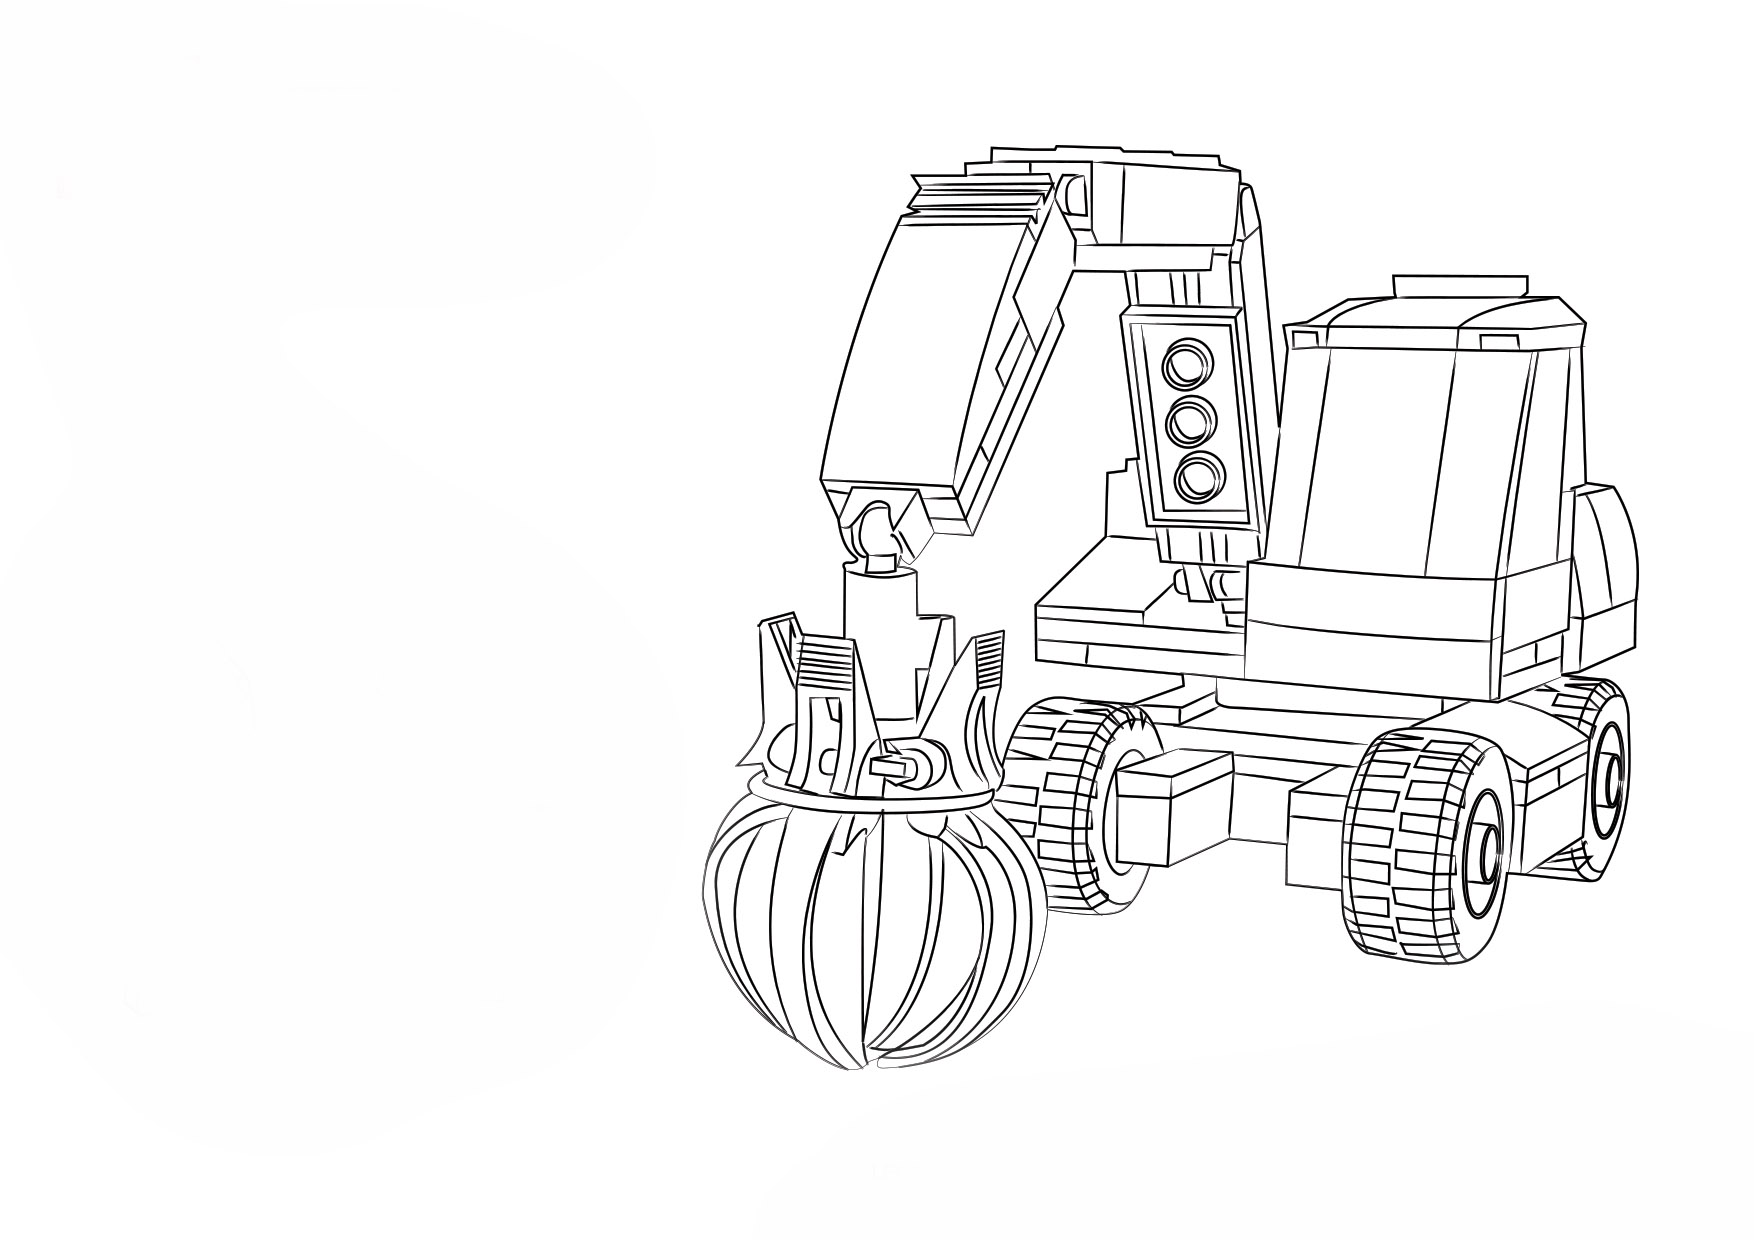 Excavator Coloring Pages to download and print for free